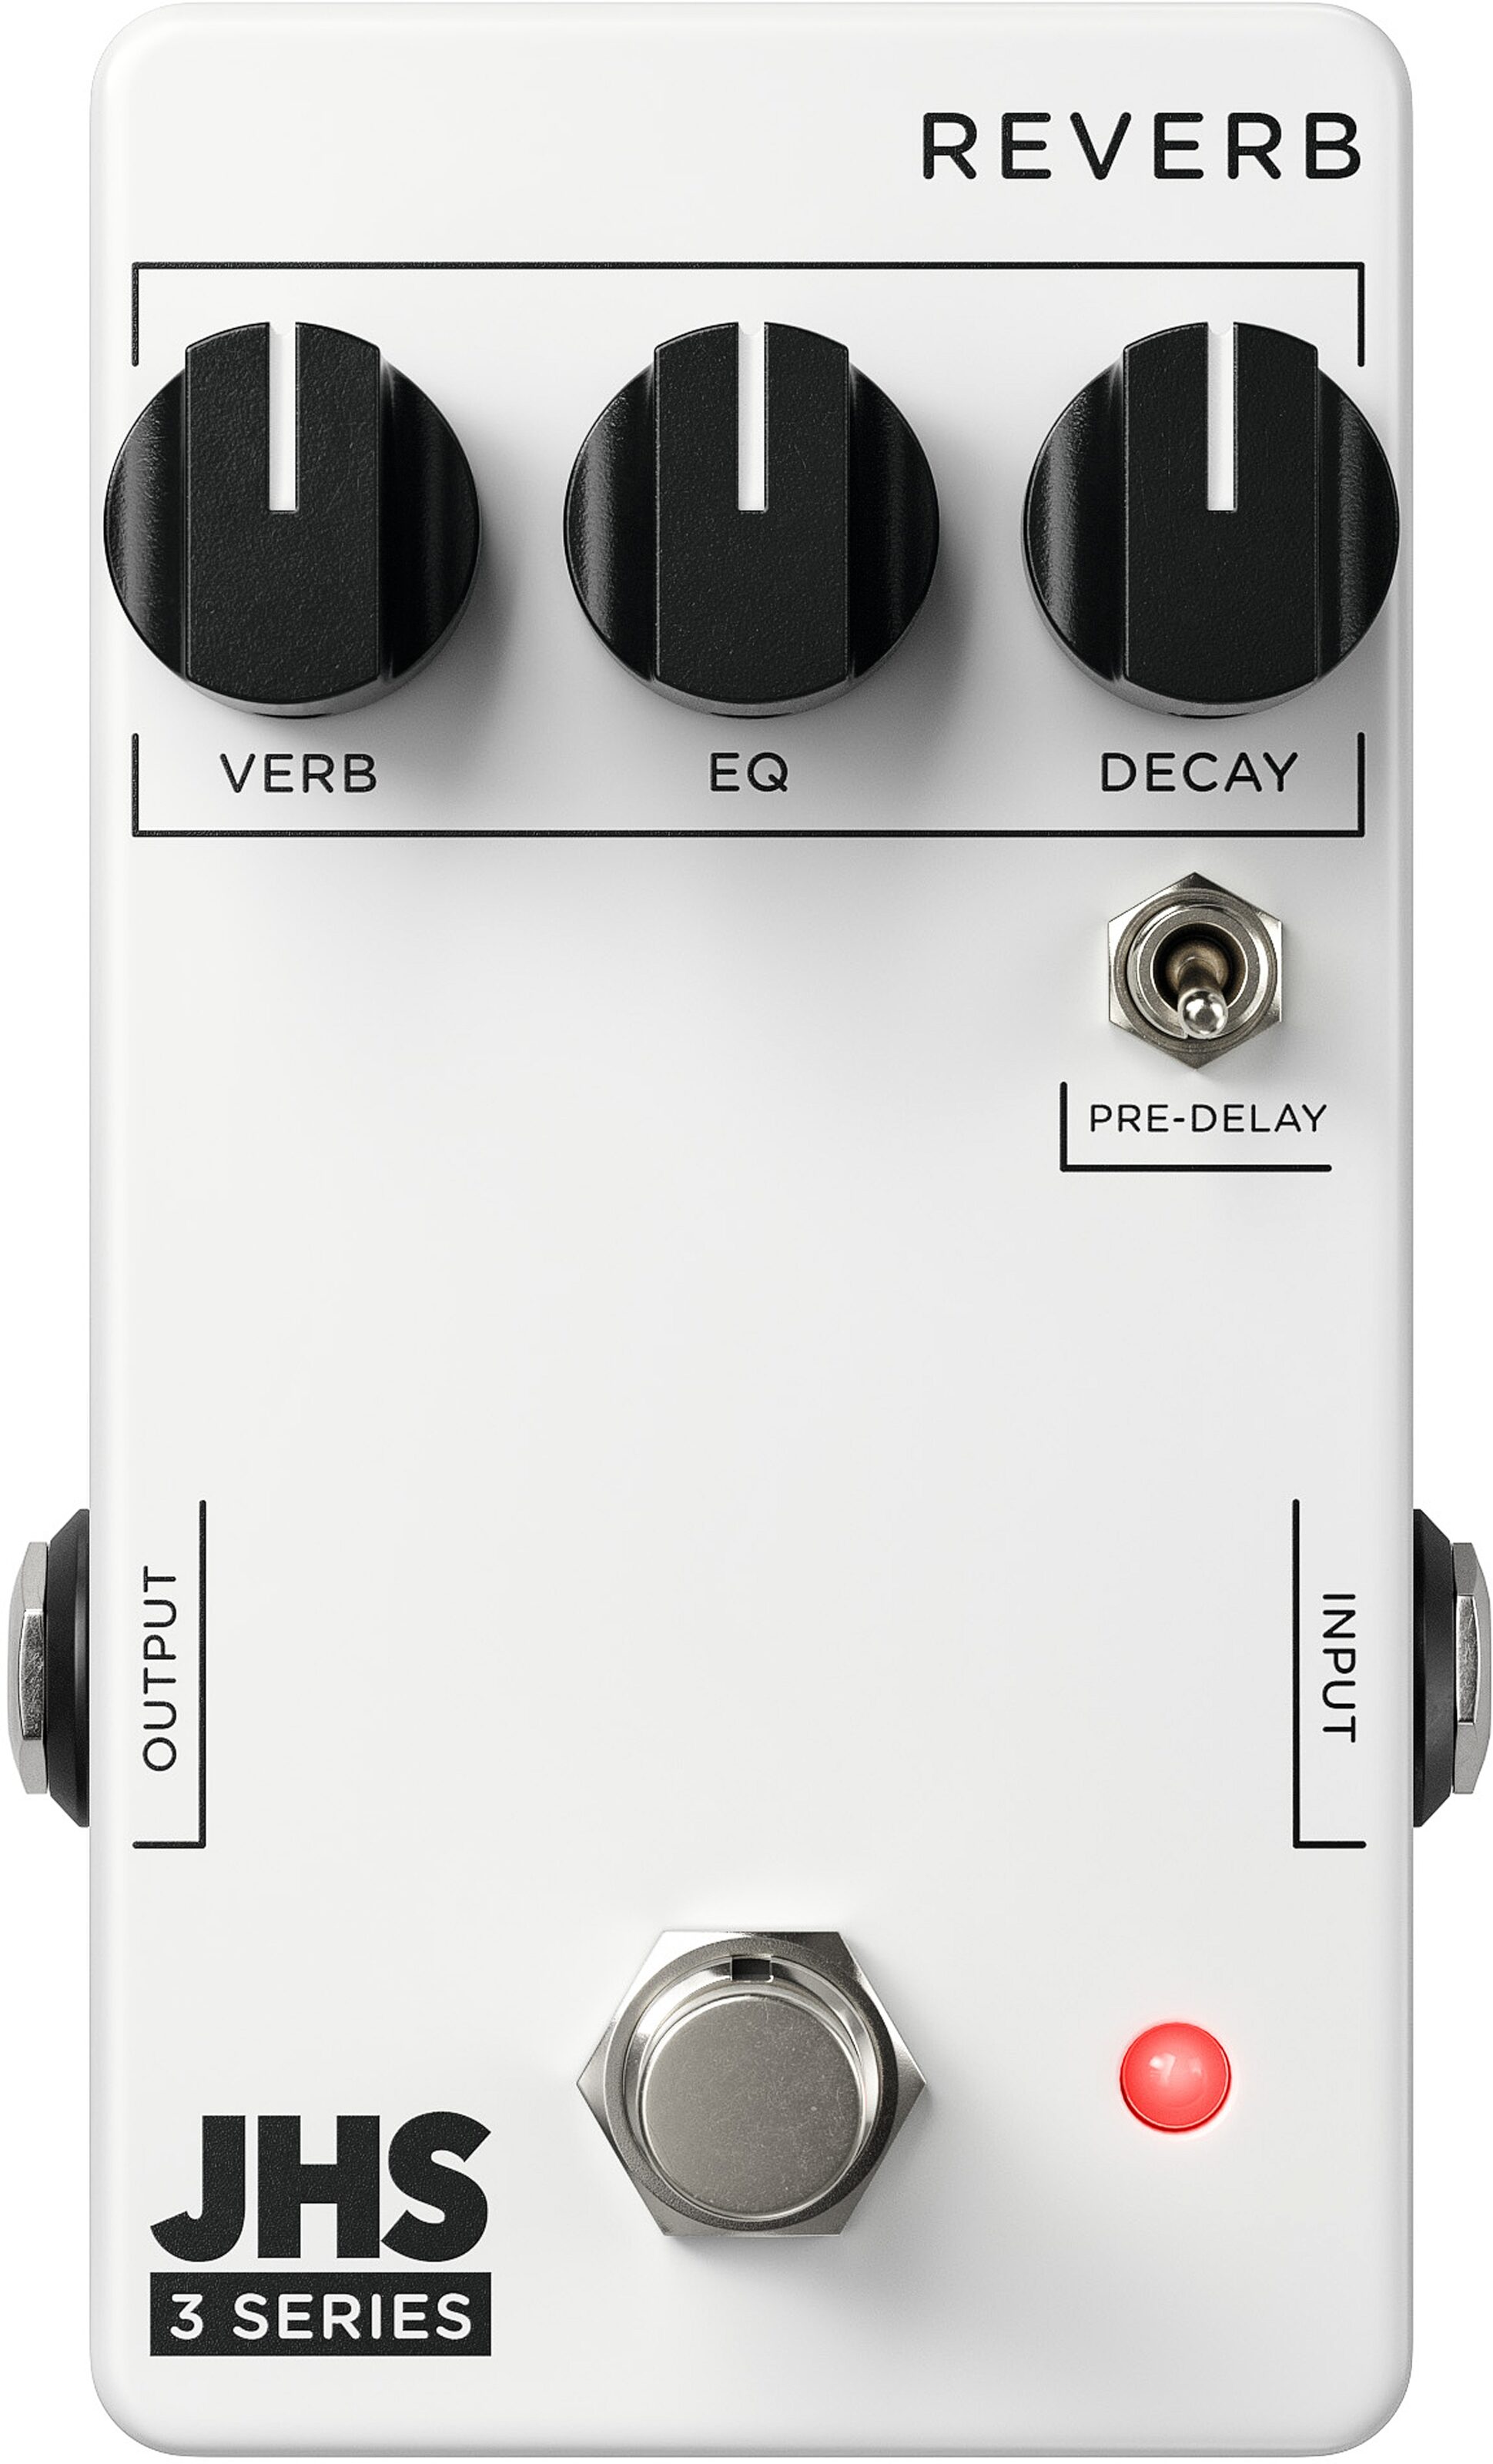 Jhs 3 Series Reverb Pedal Zzounds